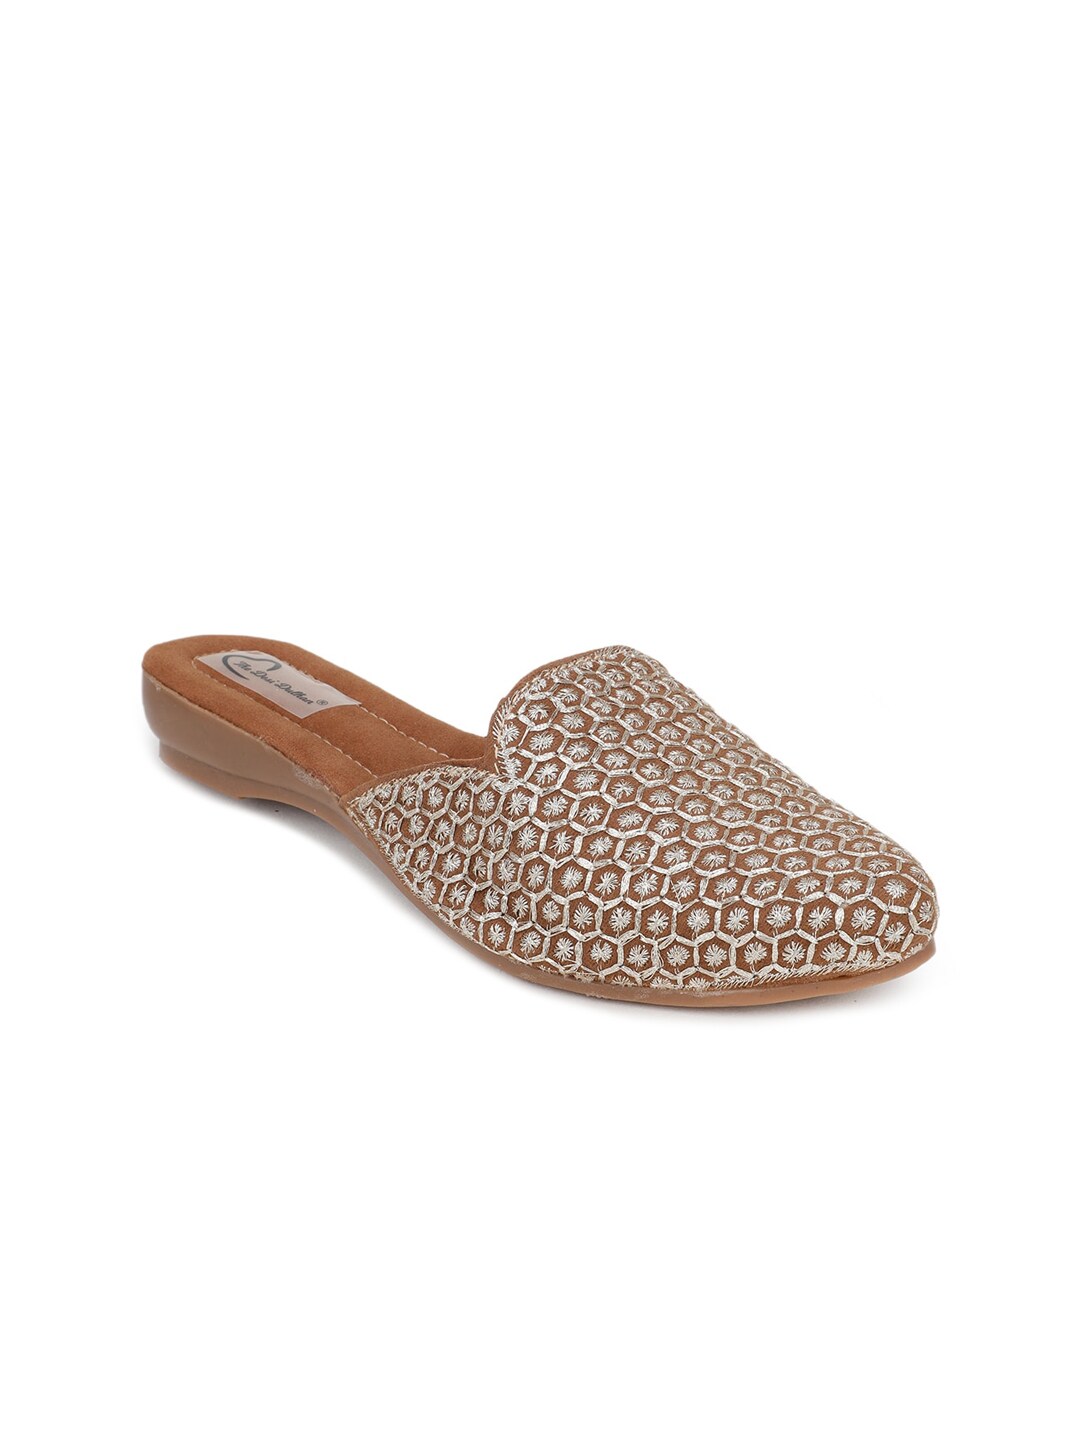 The Desi Dulhan Women Tan Coloured & Silver-Toned Embroidery Leather Mules Flats Price in India